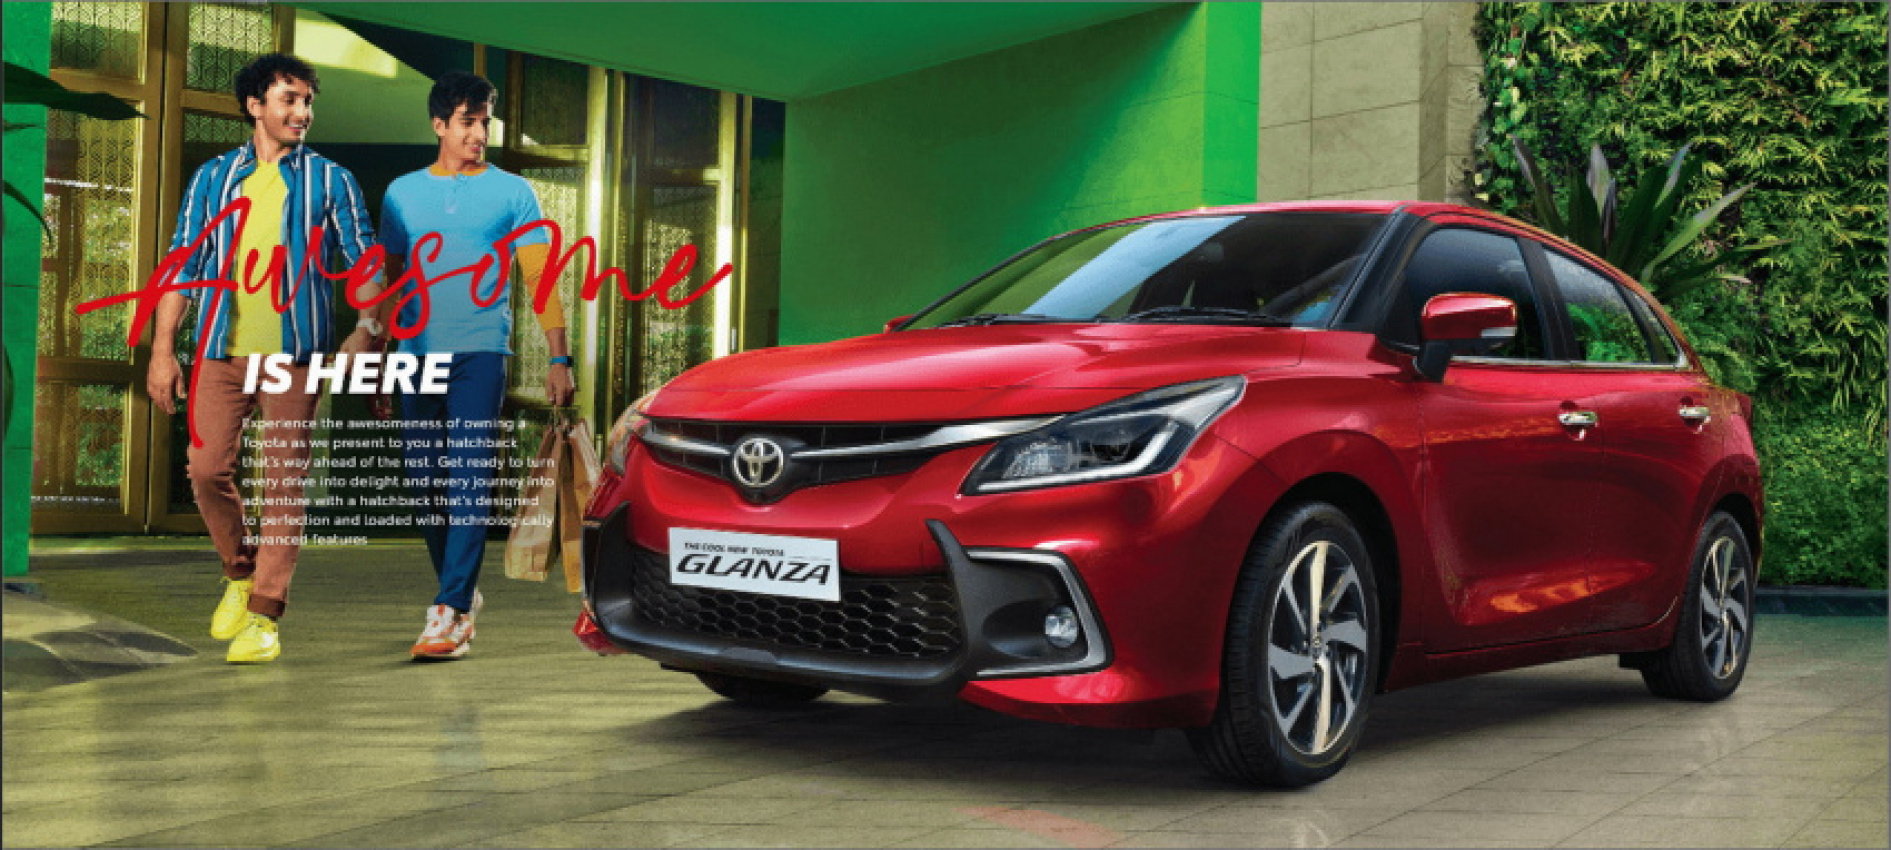 autos, cars, news, suzuki, toyota, india, new cars, toyota videos, video, vnex, 2022 toyota glanza launched in india as suzuki baleno’s sibling